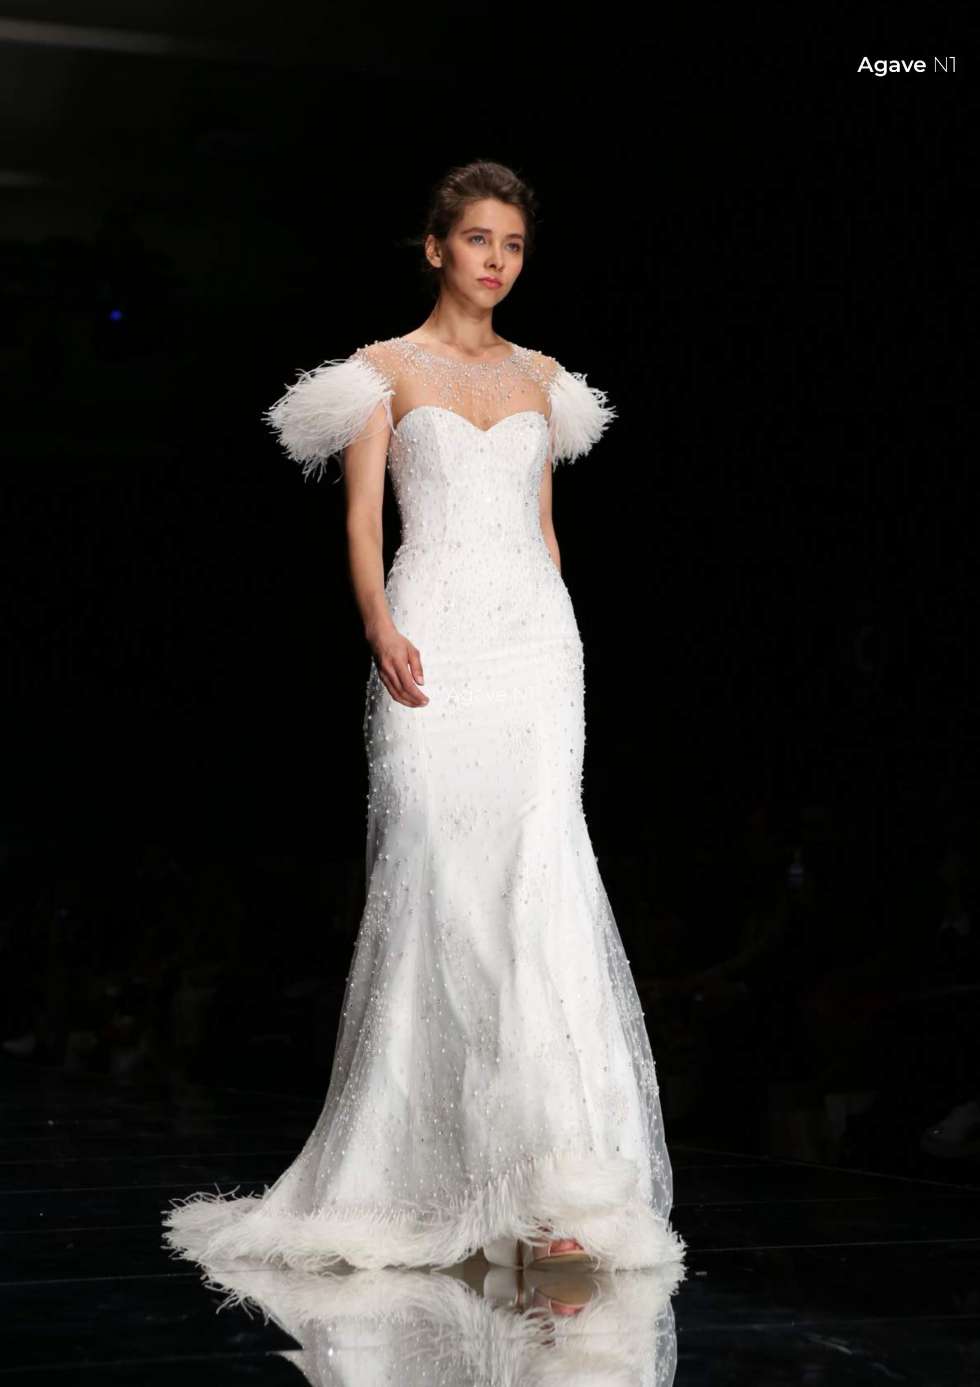 Quintessentially The Bridal Couture for 2020 by Enzo Miccio